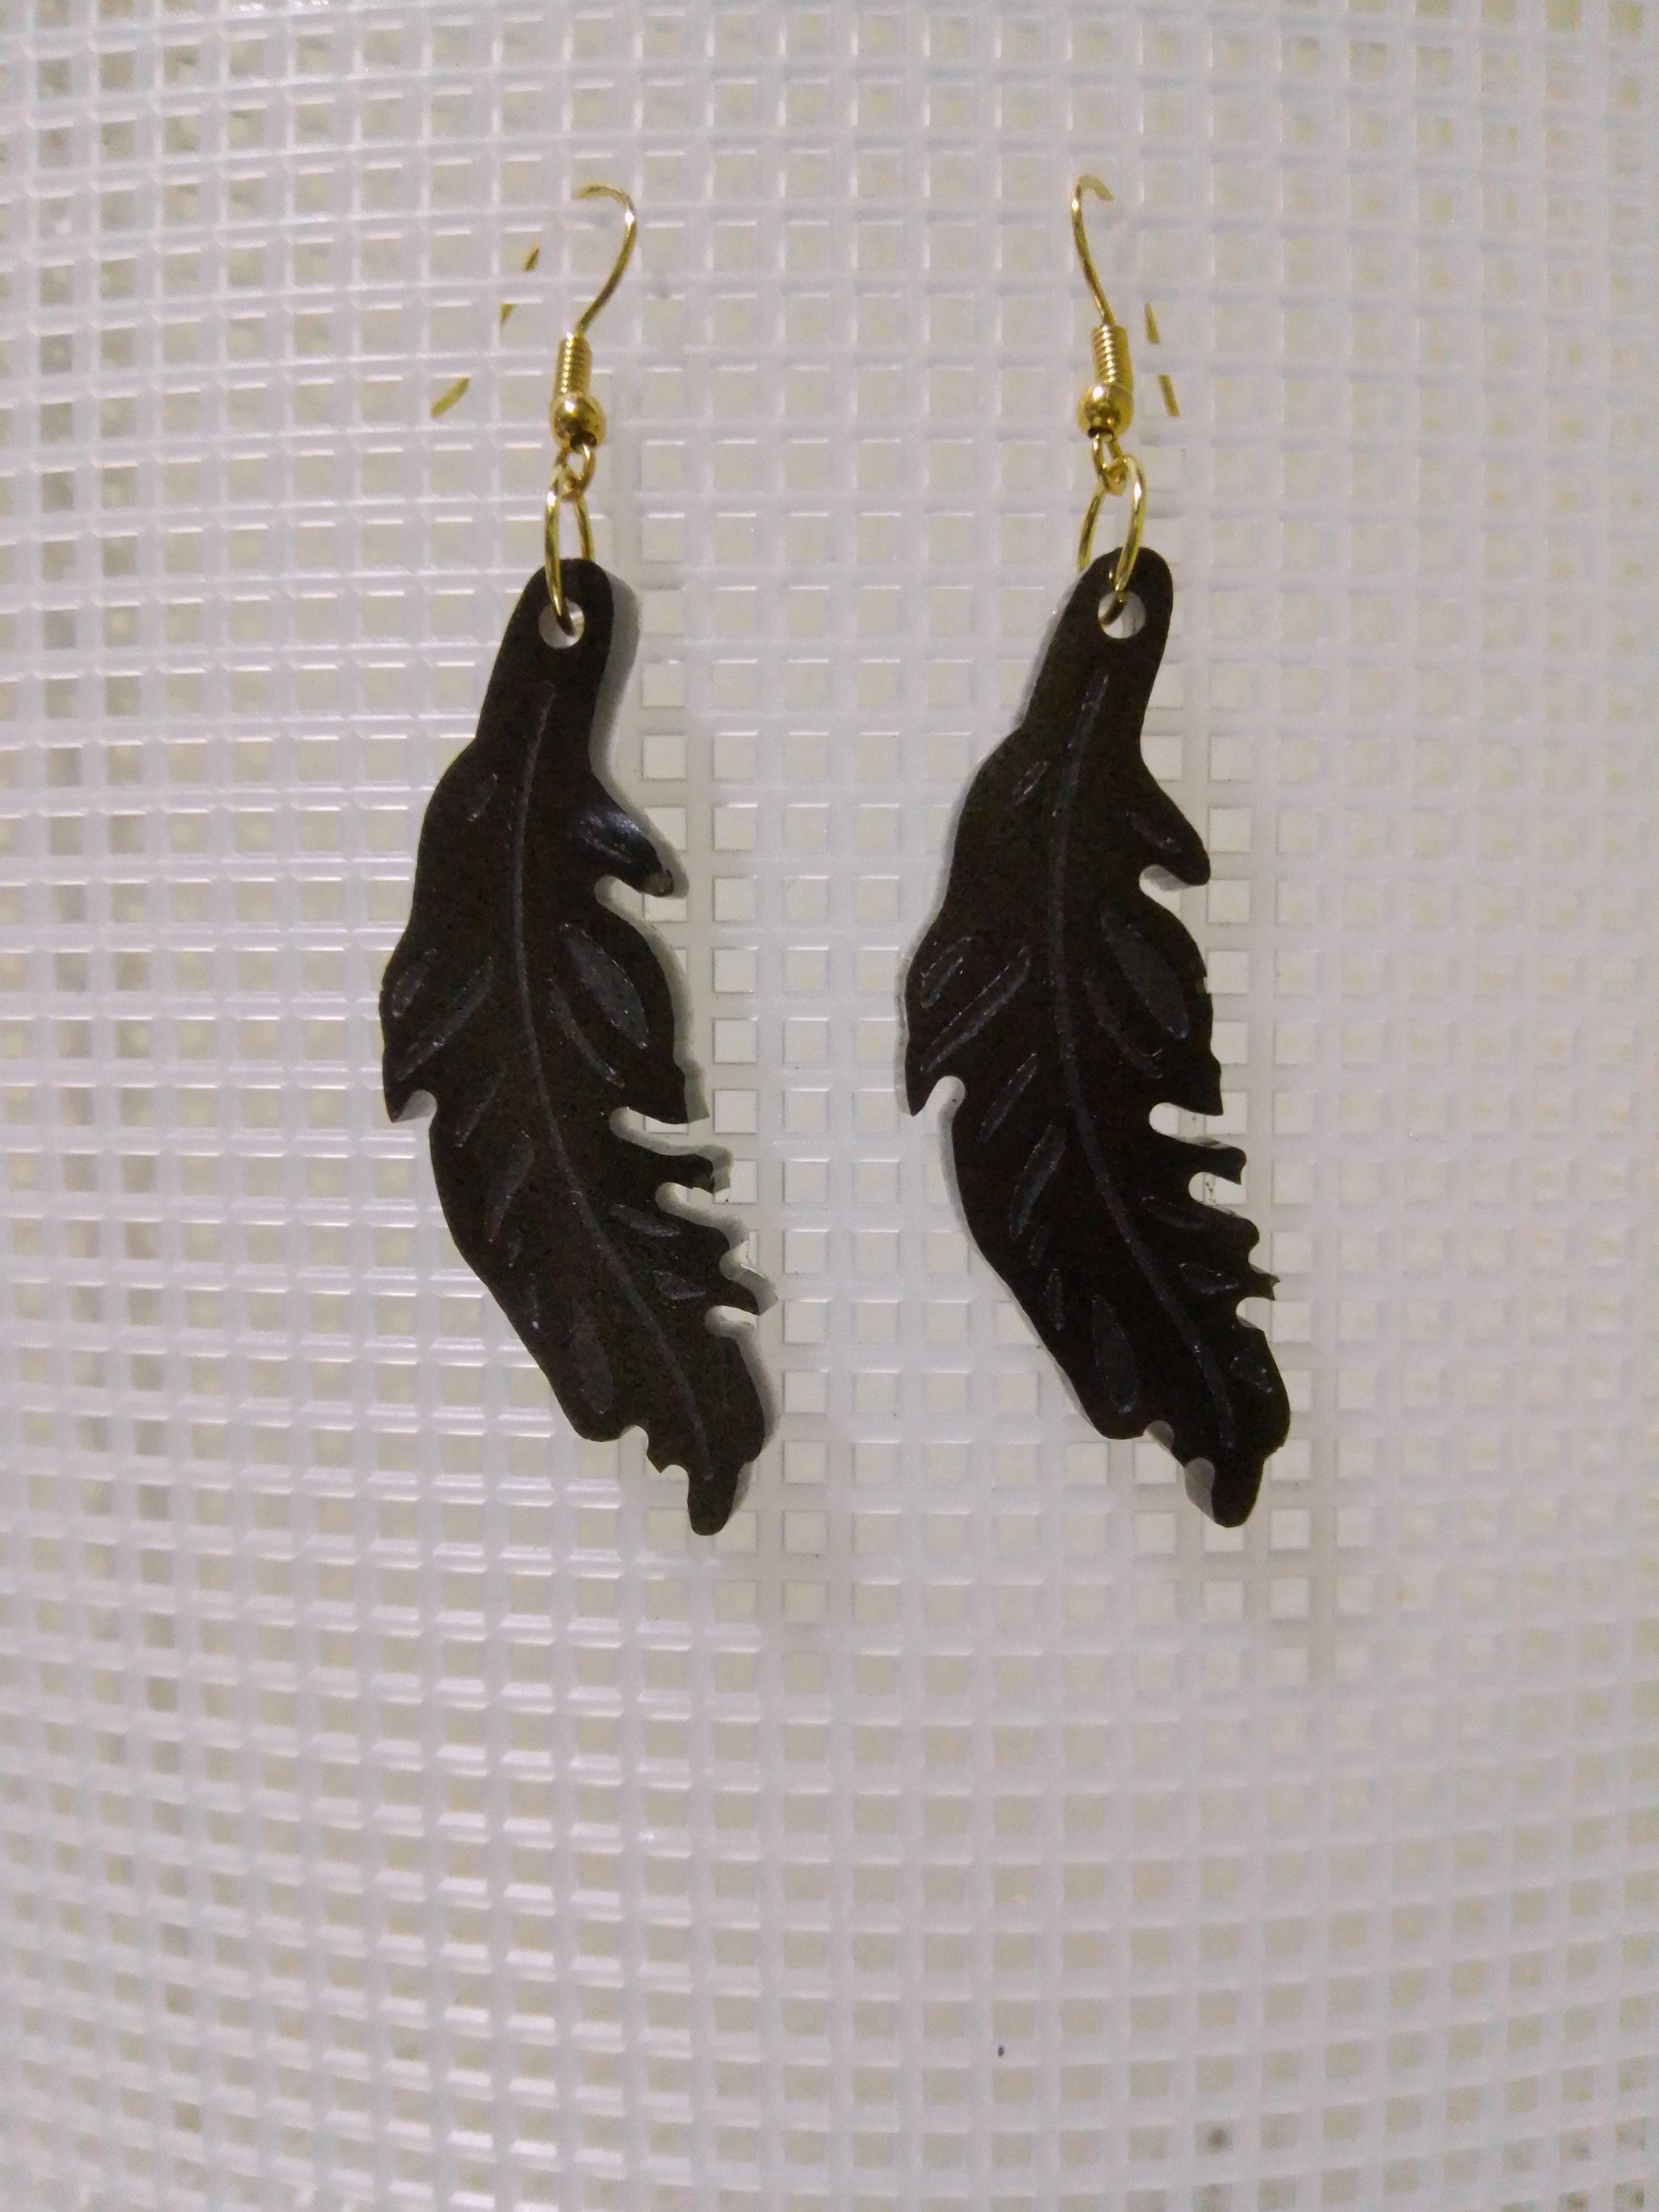 volcanic ash and epoxy resin earrings shaped like a feather